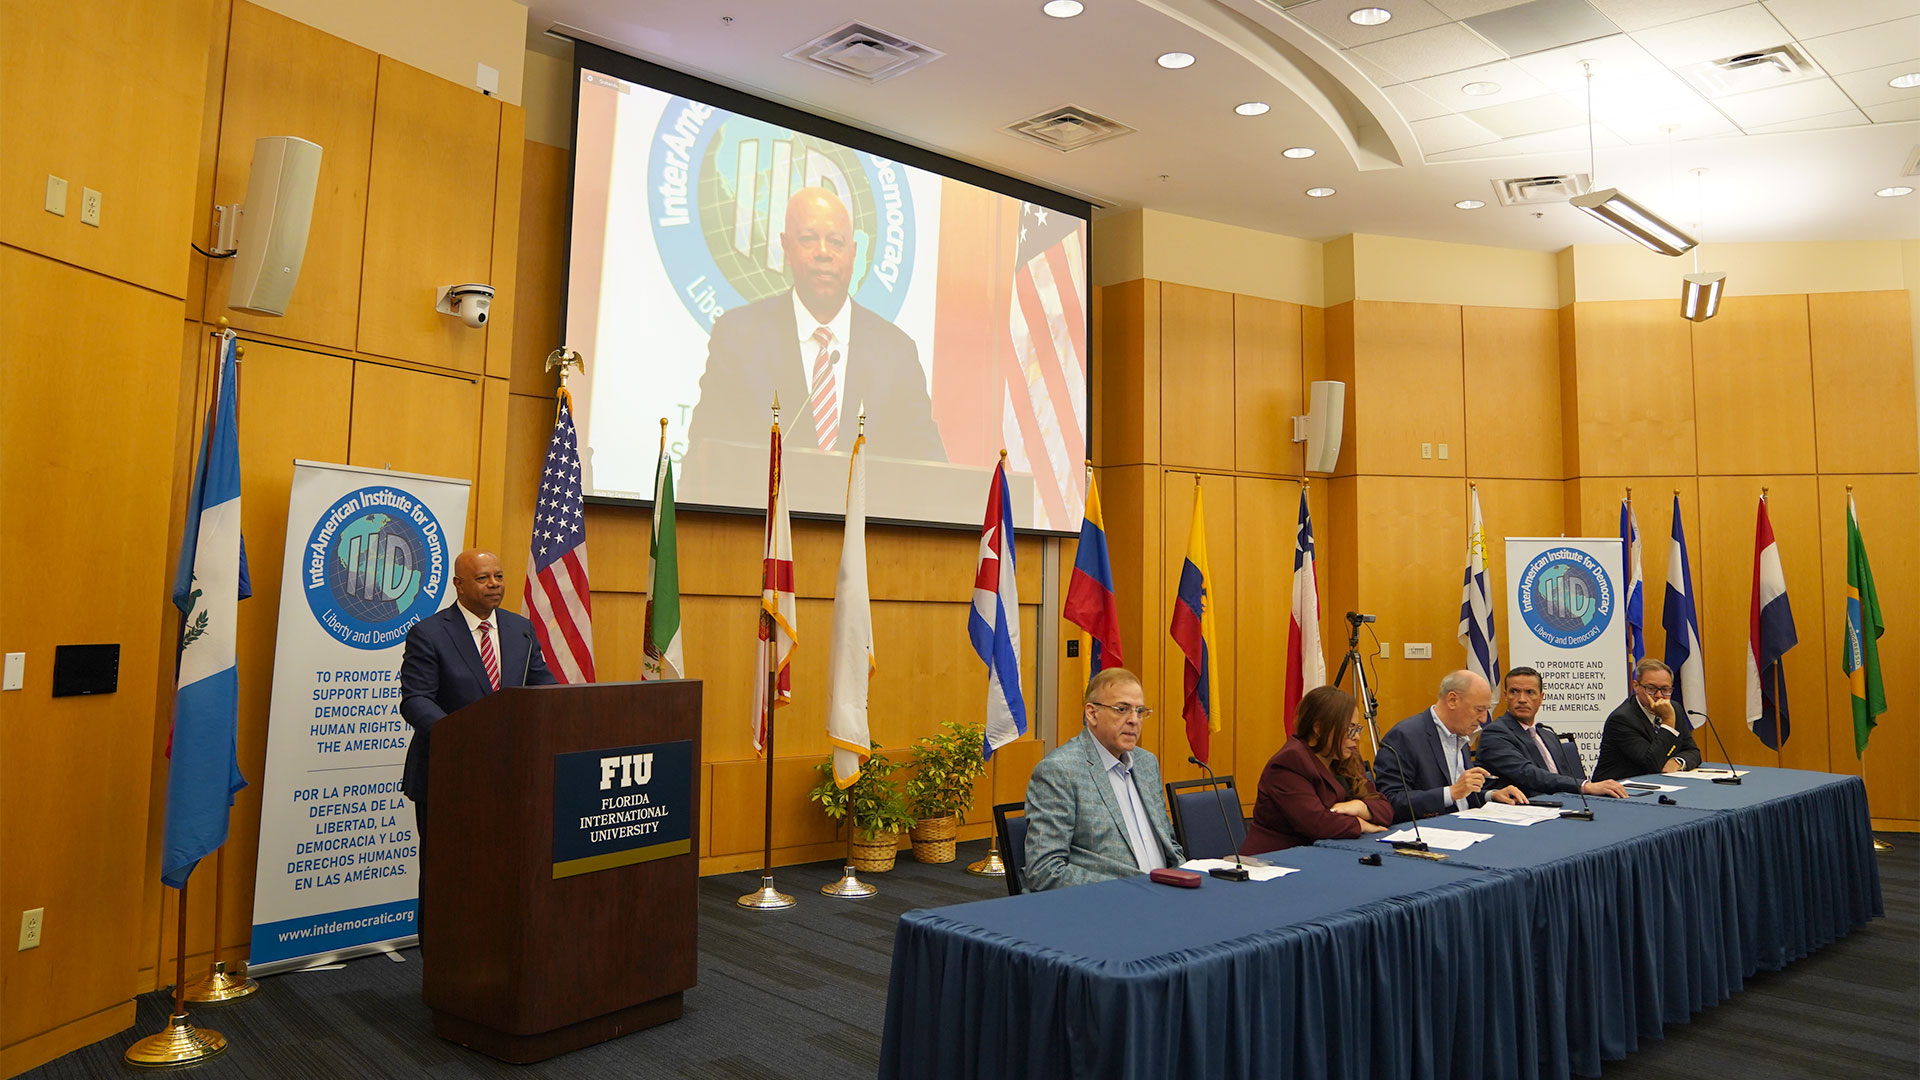 "Right and left in the twenty-first century"the forum that took place this Tuesday at Florida International University (FIU) (Image source: Nachomartinfilms)